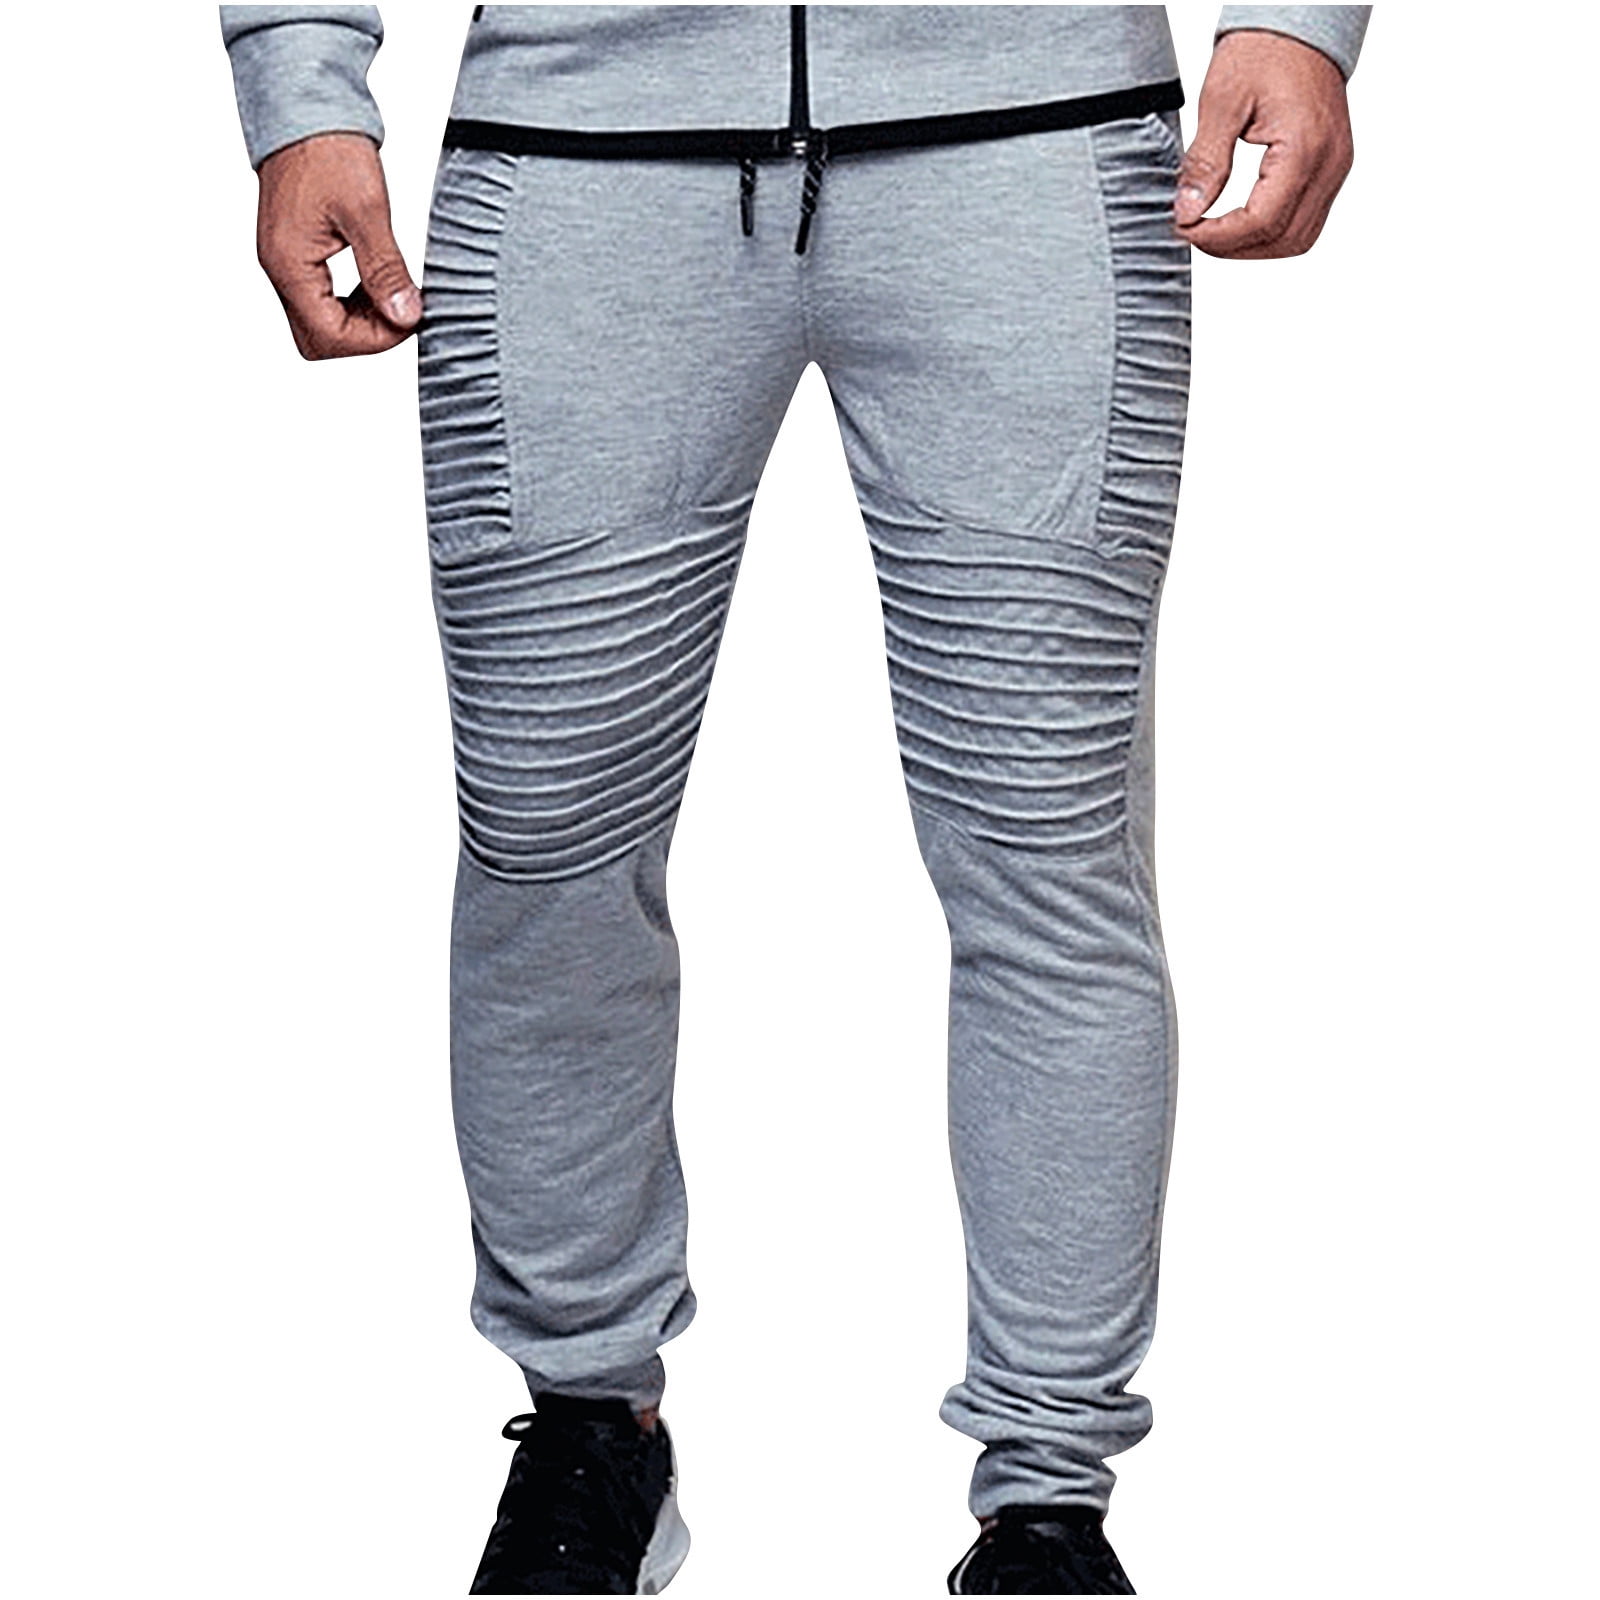 YYDGH On Clearance Men's Striped Tight Sweatpants Drawstring Hip